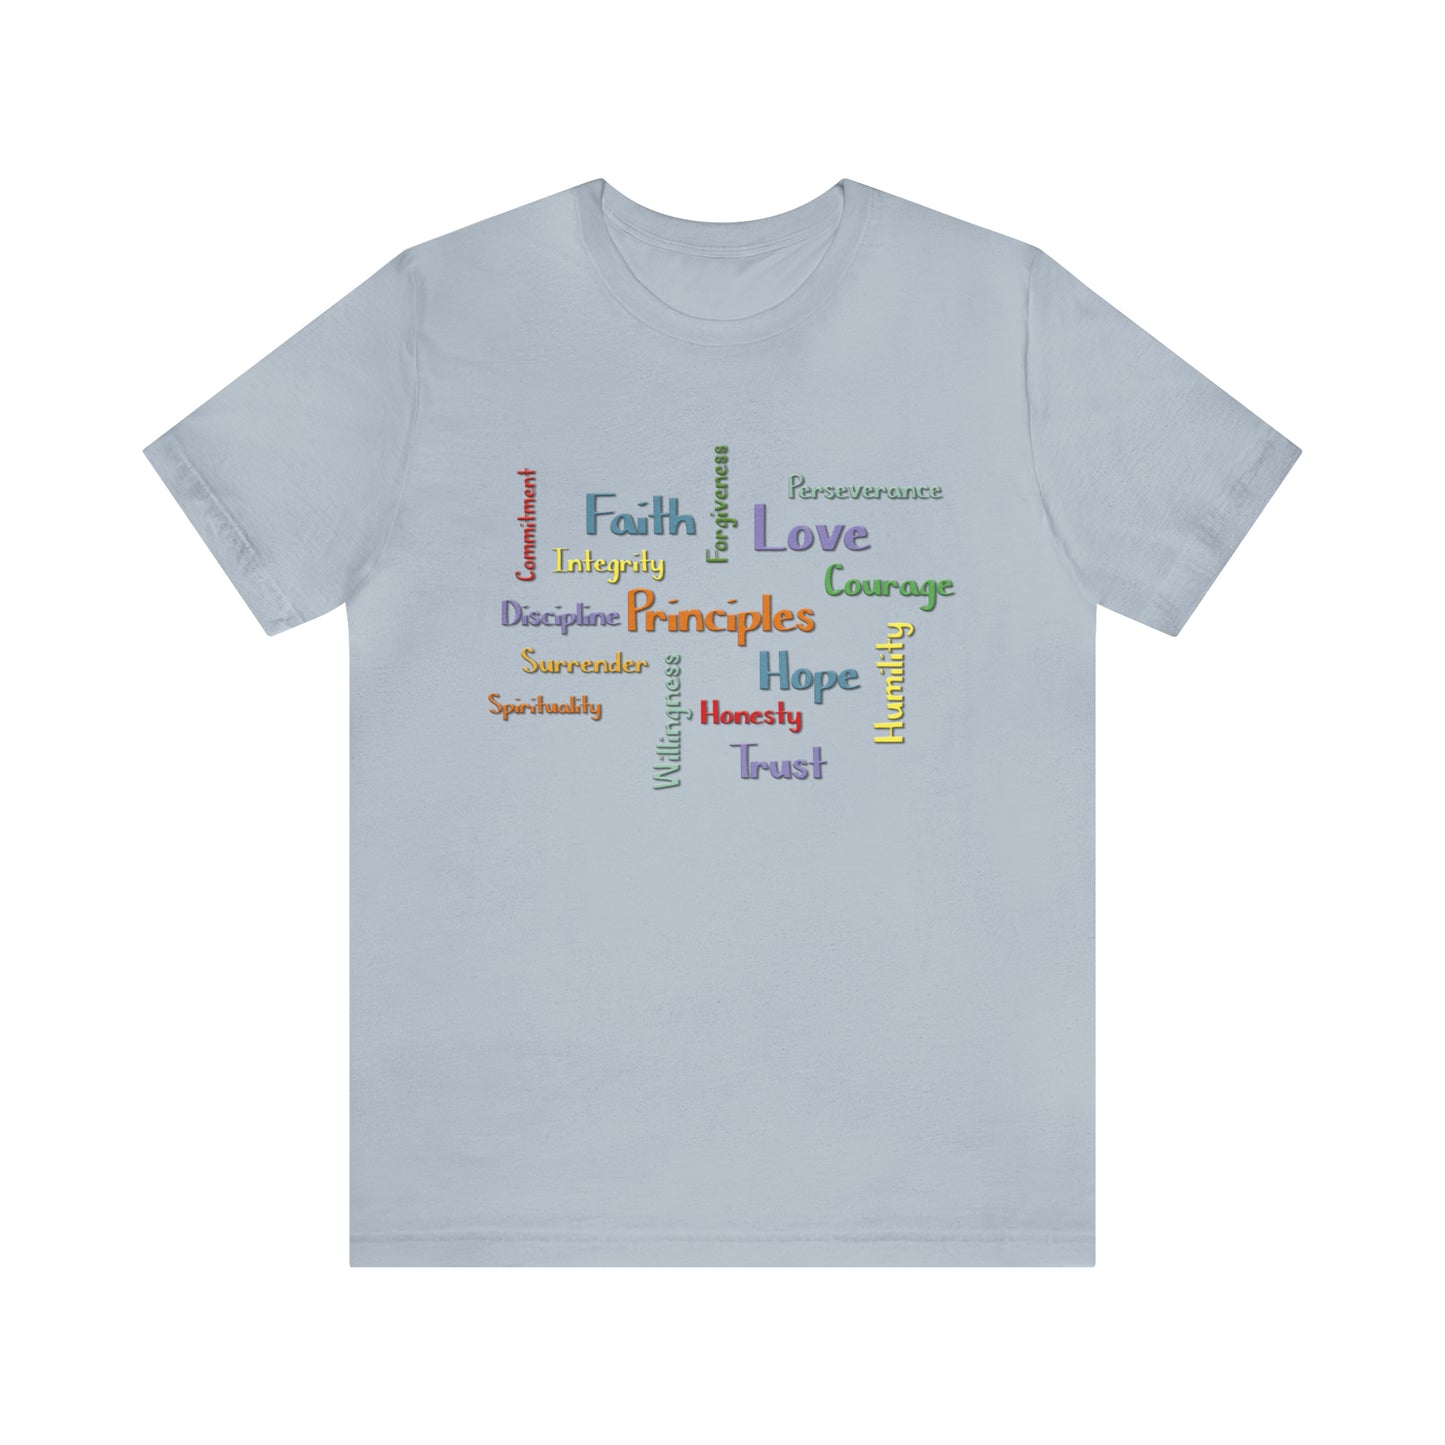 Graphic Tee, Graphic T-shirt, Spiritual Principles of Recovery, Word Cloud Design, Gift for Recovery or Sober Anniversary